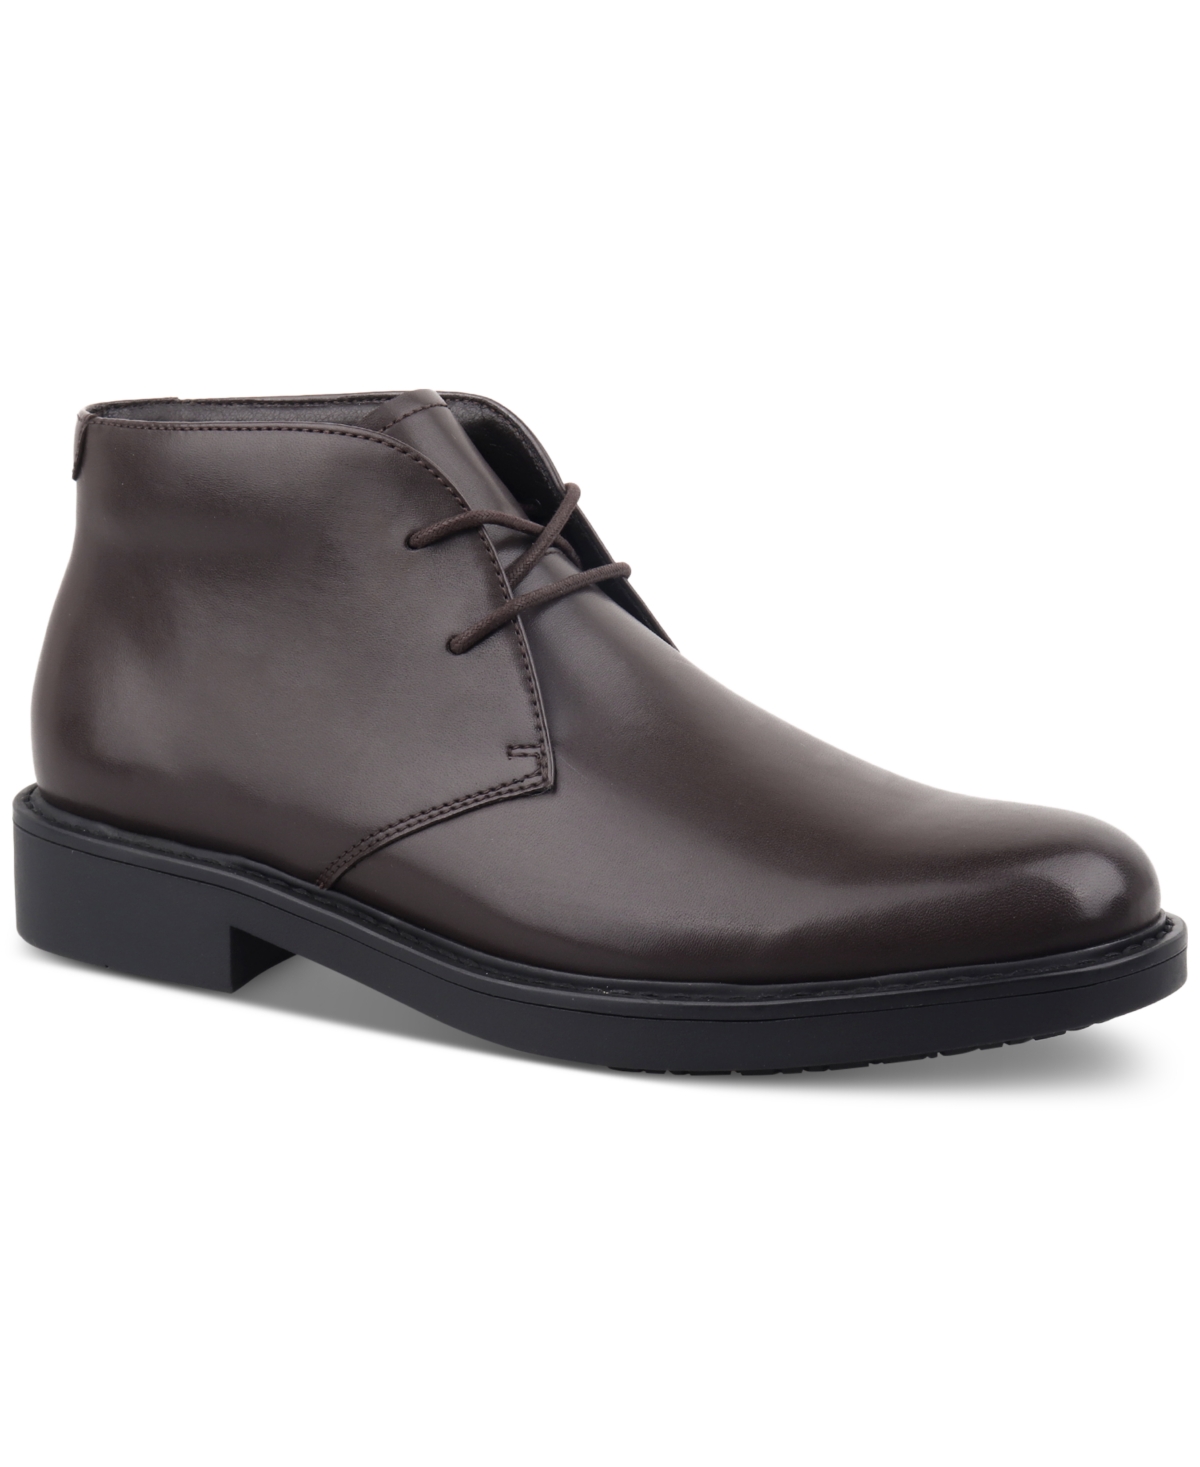 Men's Zane Lace-Up Chukka Boots, Created for Macy's - Brown